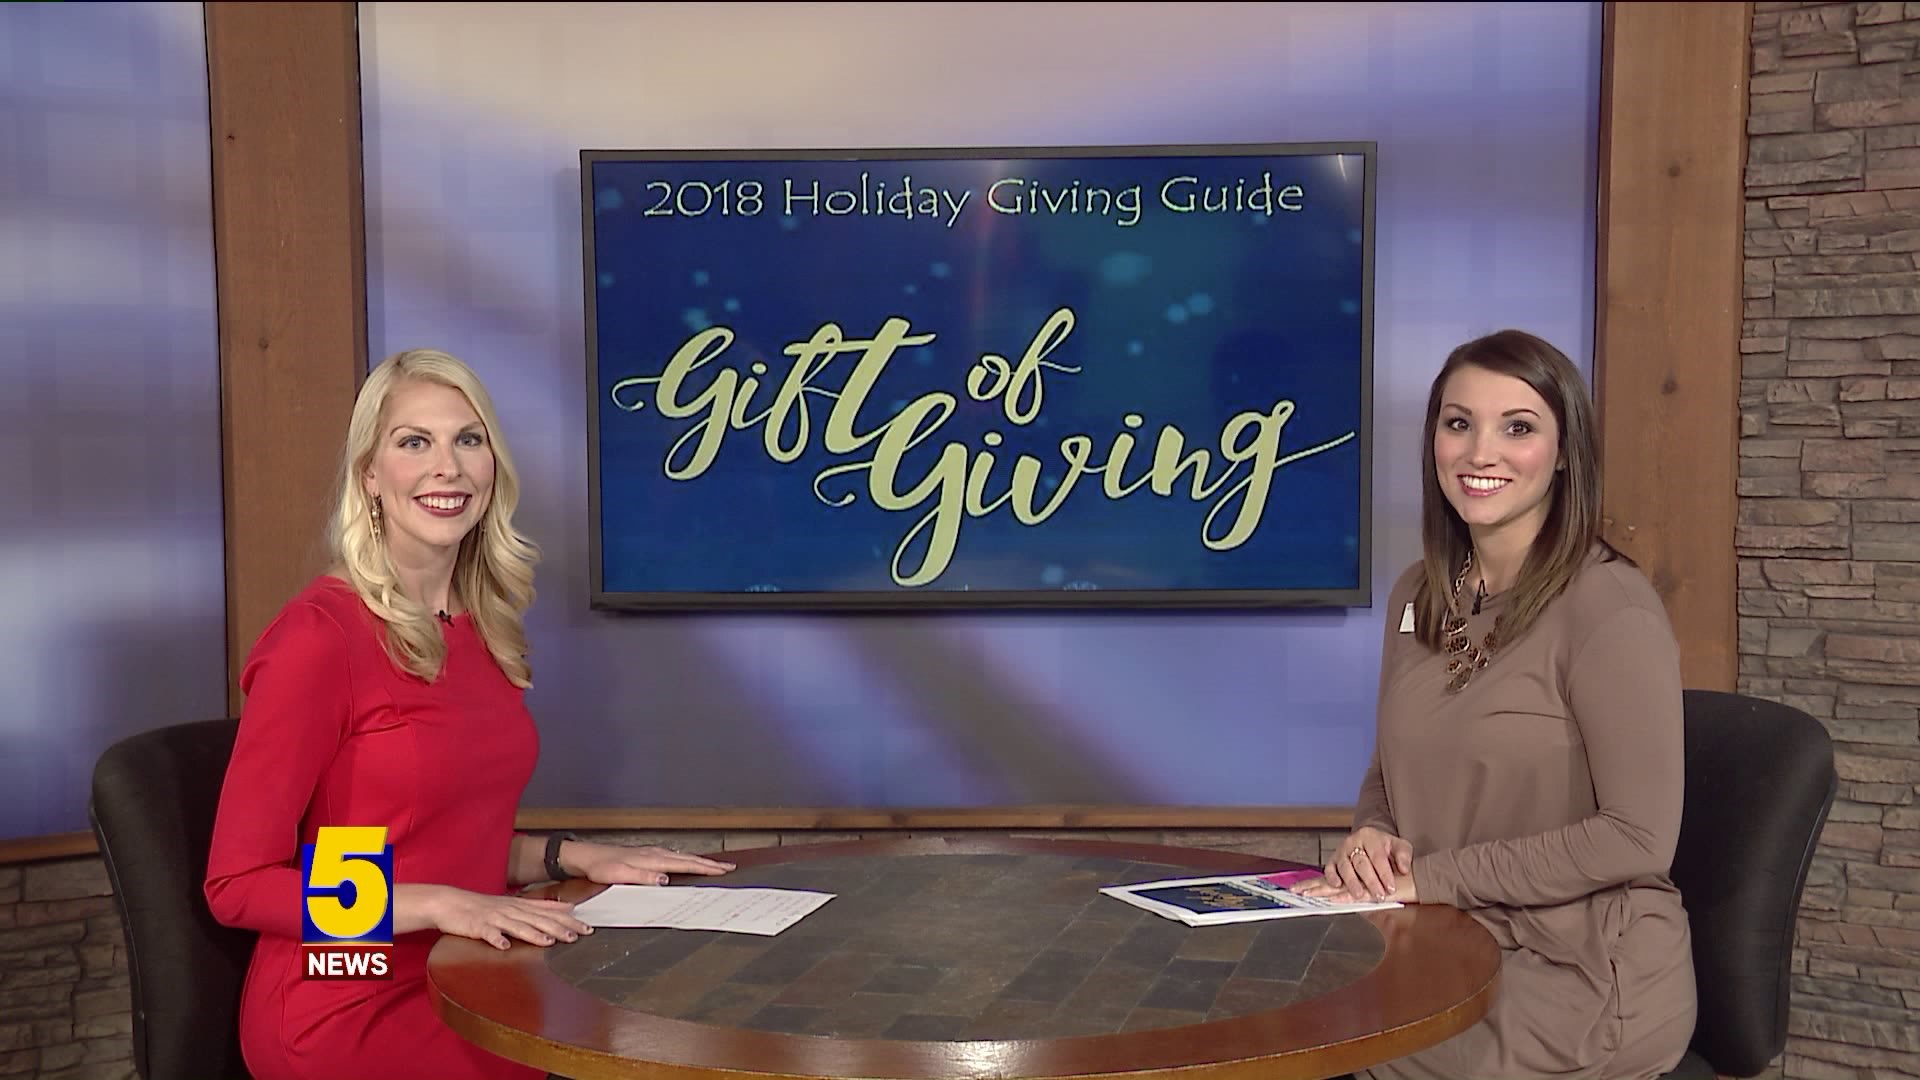 UNITED WAY GIFT OF GIVING